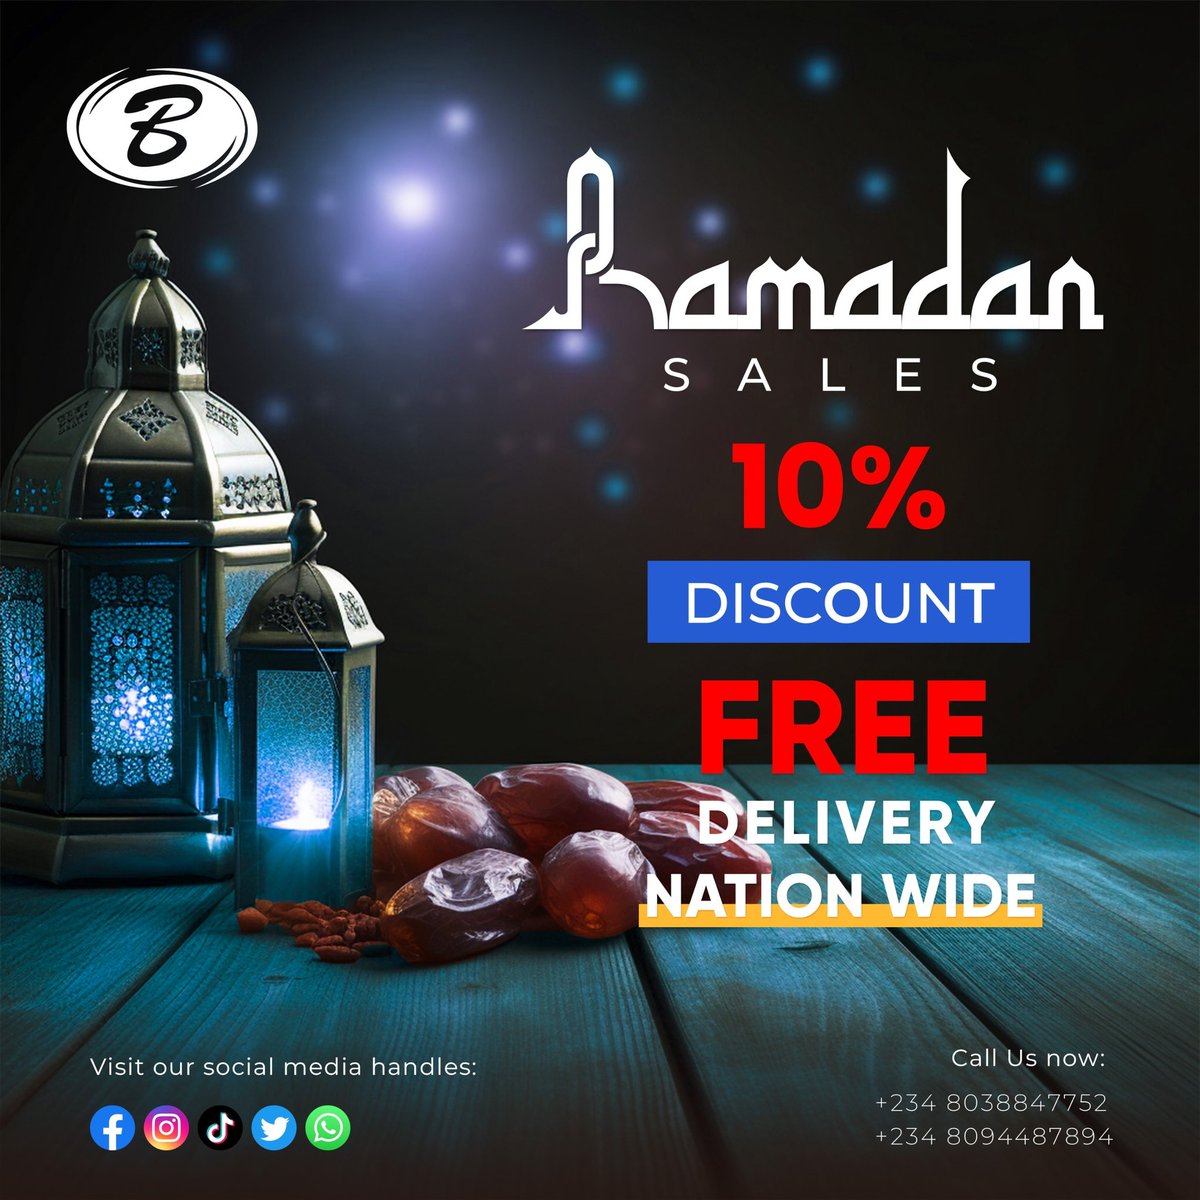 🌙✨ Ramadan Kareem Offer! Enjoy the blessings of the season with 10% off on all products and FREE delivery Nation Wide! 🎁 Don't miss out on this special deal to elevate your Ramadan celebrations! #RamadanOffer #Discount #FreeDelivery #KasuwarBello #DanBello #RamadanSales